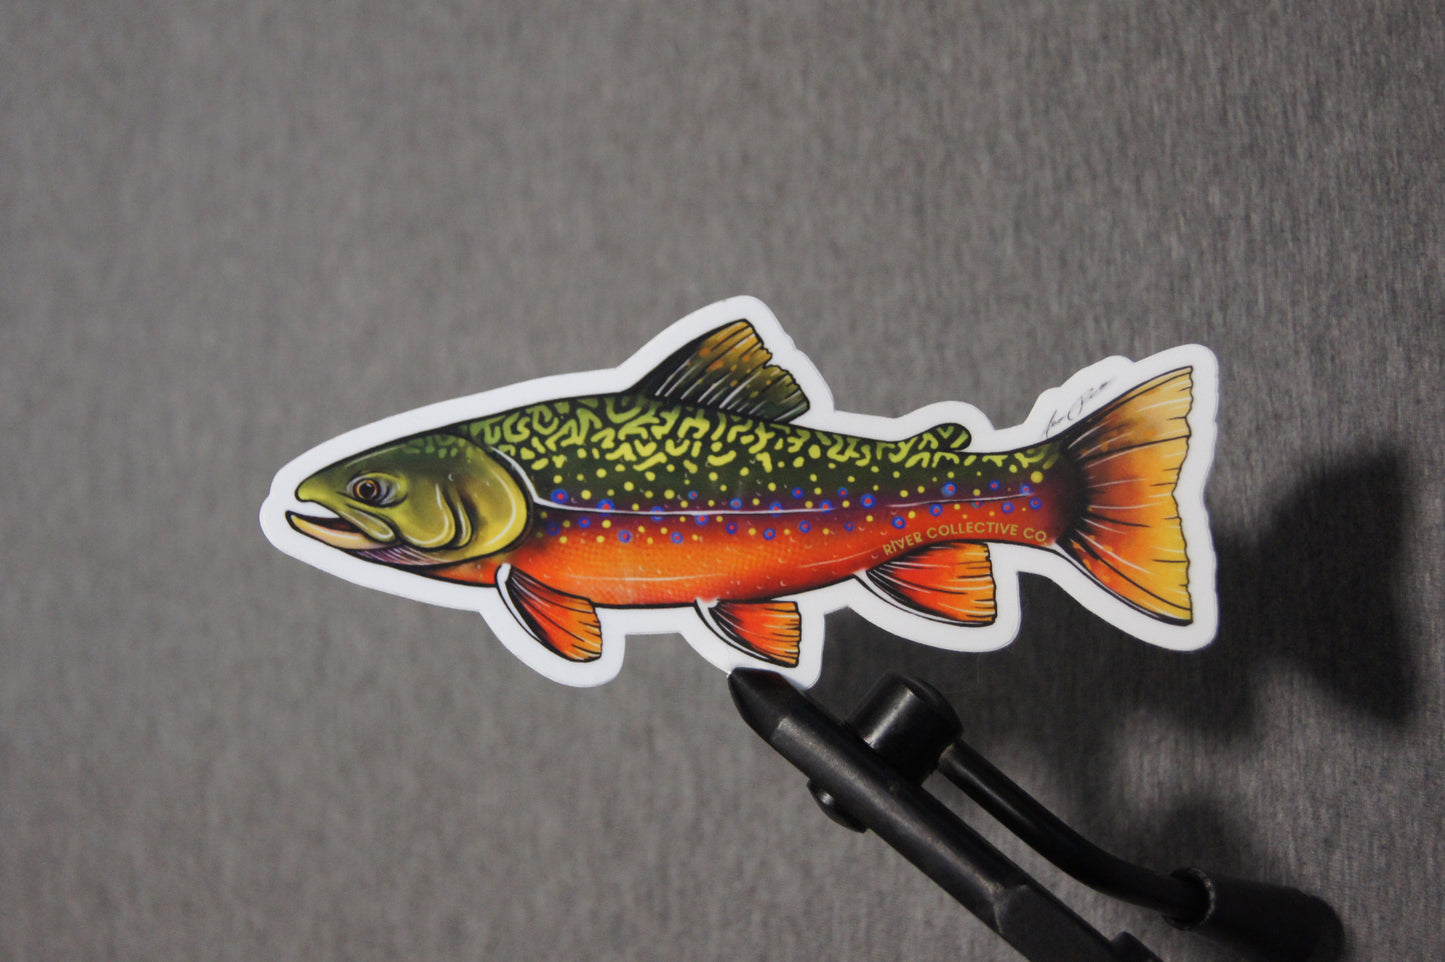 BROOK TROUT DECAL